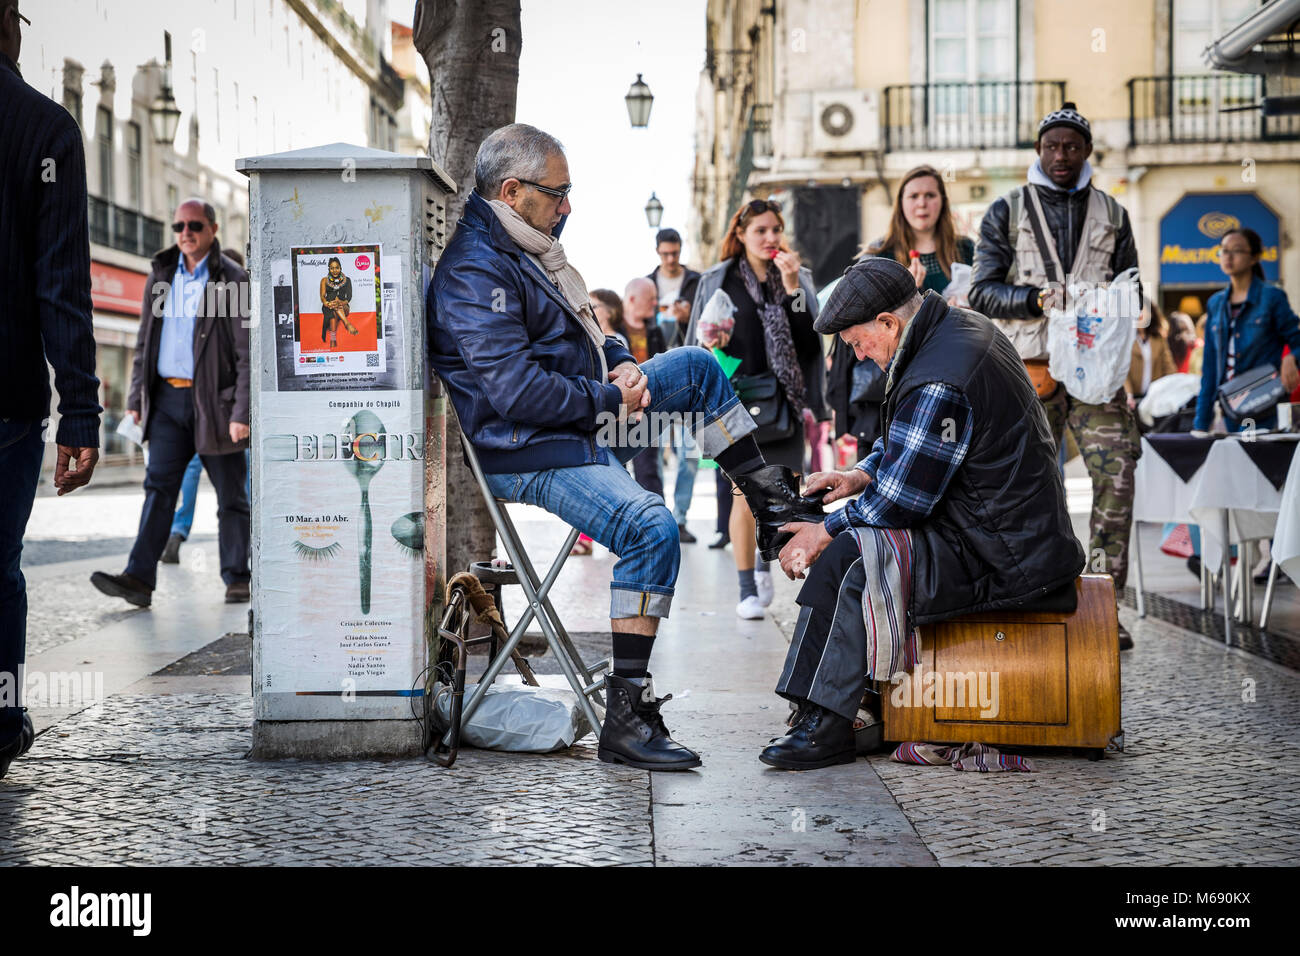 A man has his shoes shined on the street in Lisbon, Portugal. Stock Photo